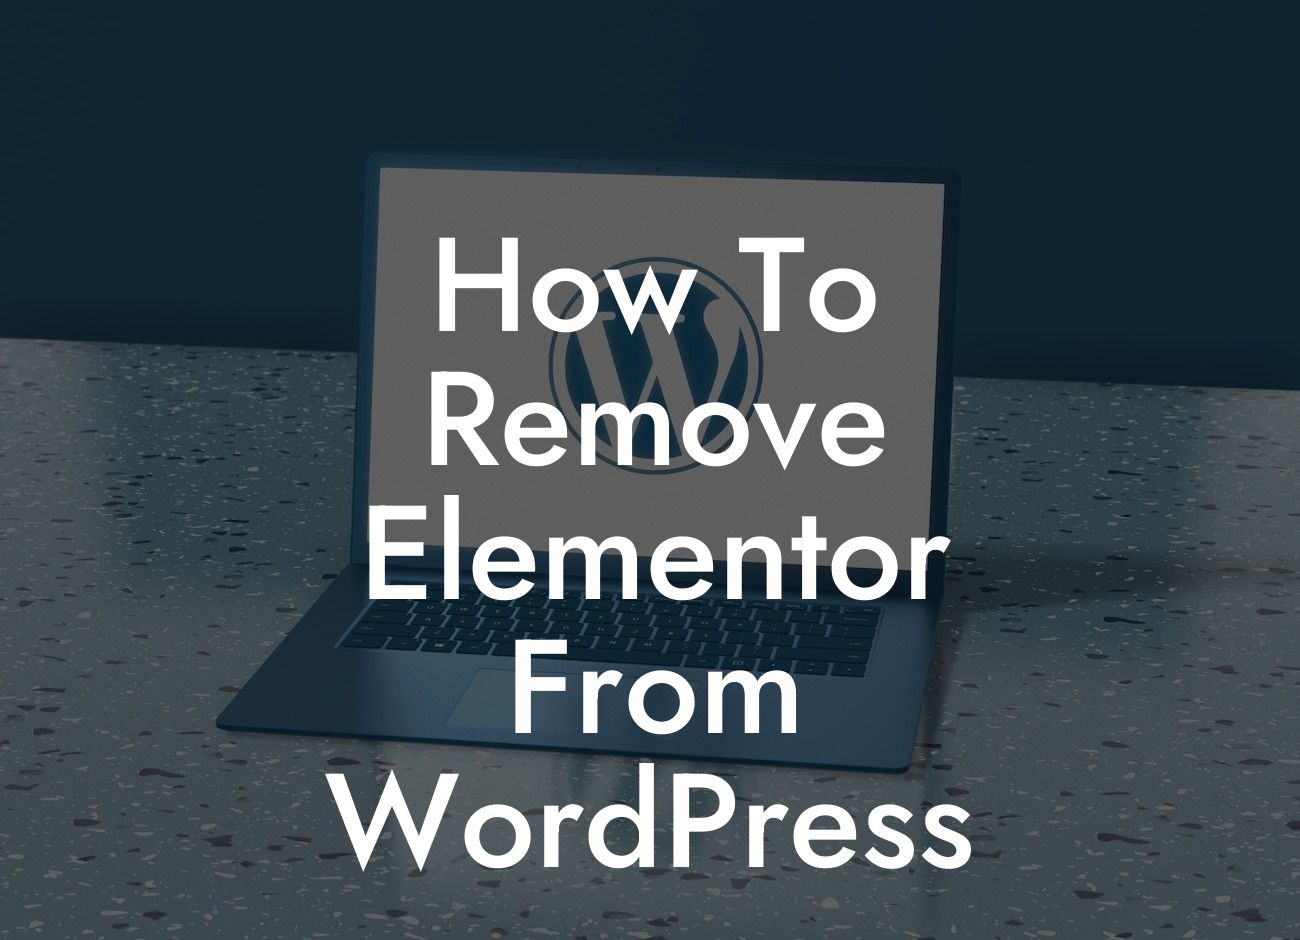 How To Remove Elementor From WordPress